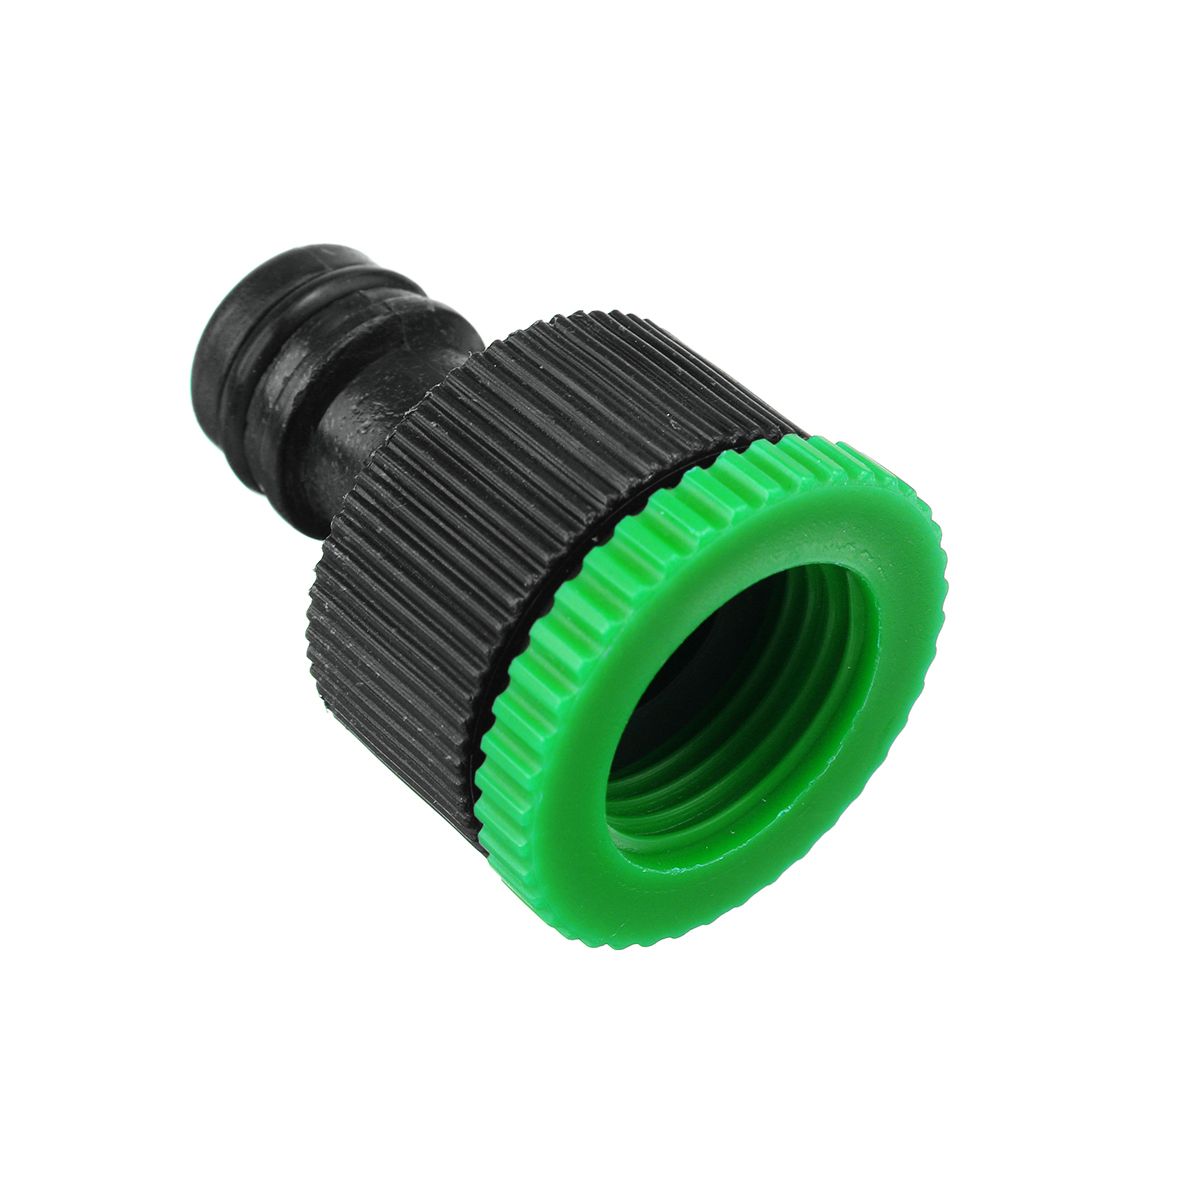 10m-Hose-Automatic-Sprinkler-Drippers-Micro-Irrigation-Drip-Plant-Watering-Garden-System-1667245